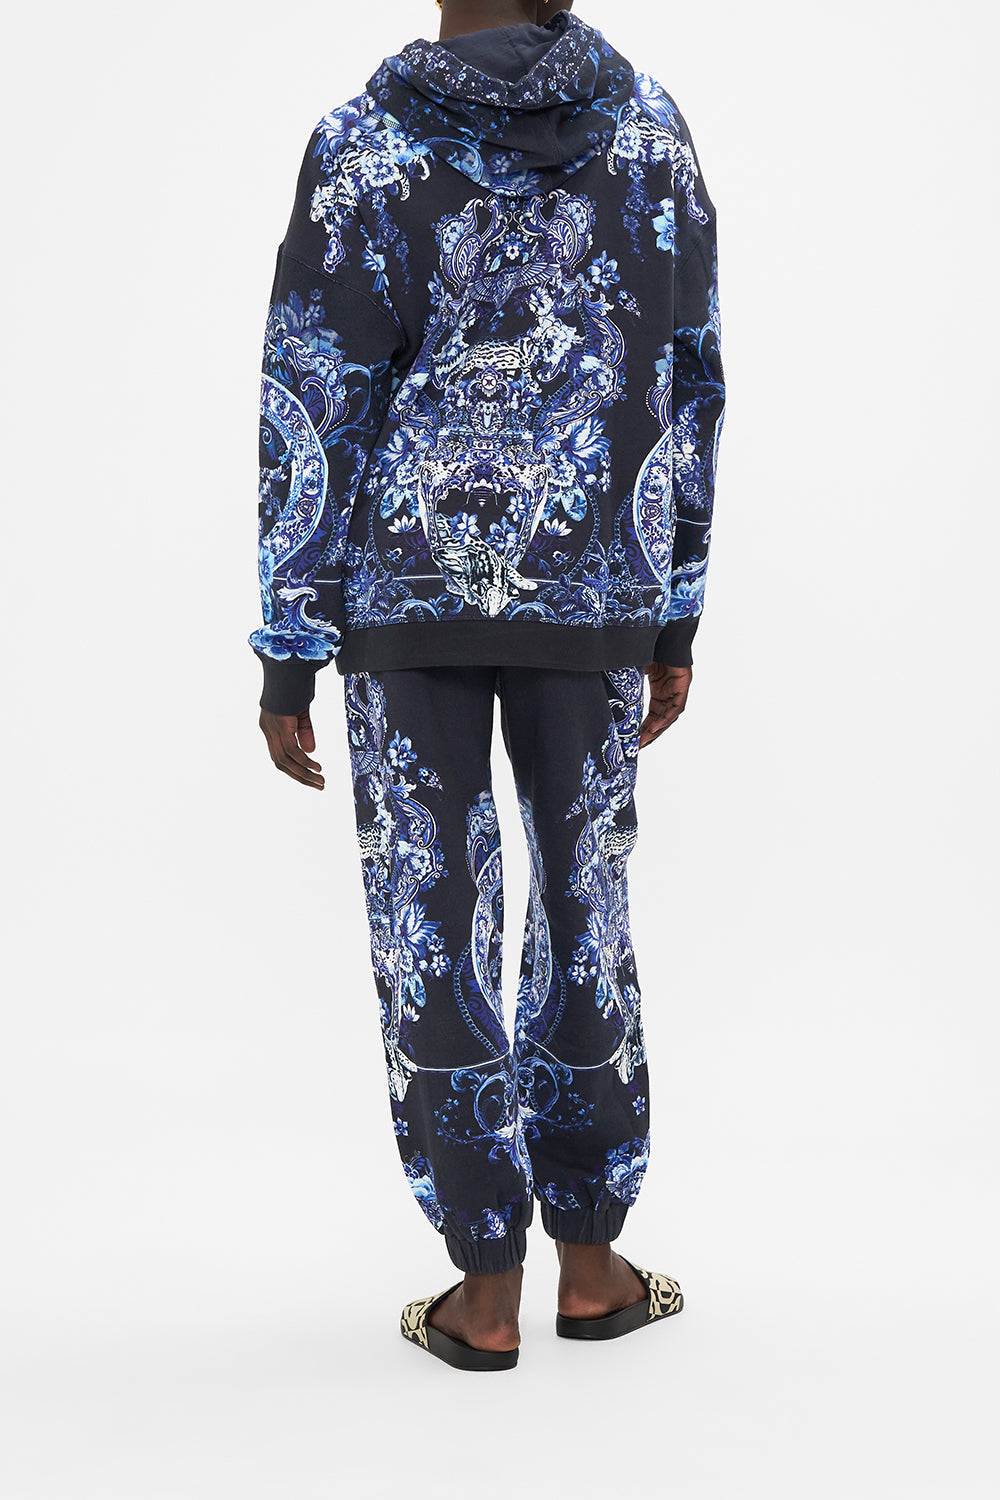 Back view of model wearing CAMILLA printed hoodie in Delft Dynasty print